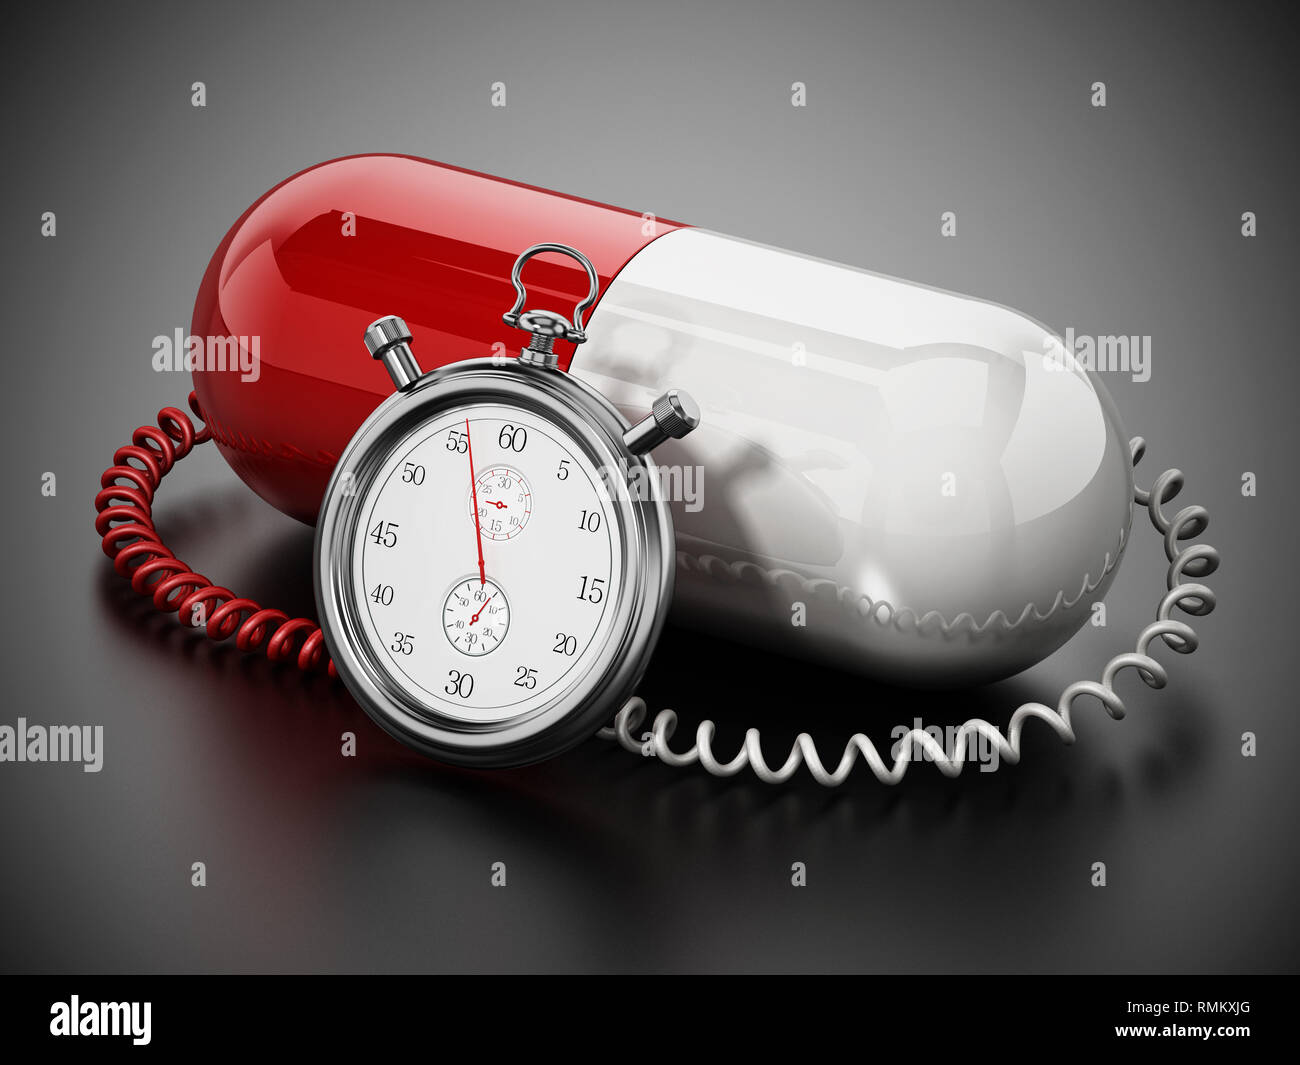 Chronometer attached to red and white capsule pill. 3D illustration. Stock Photo